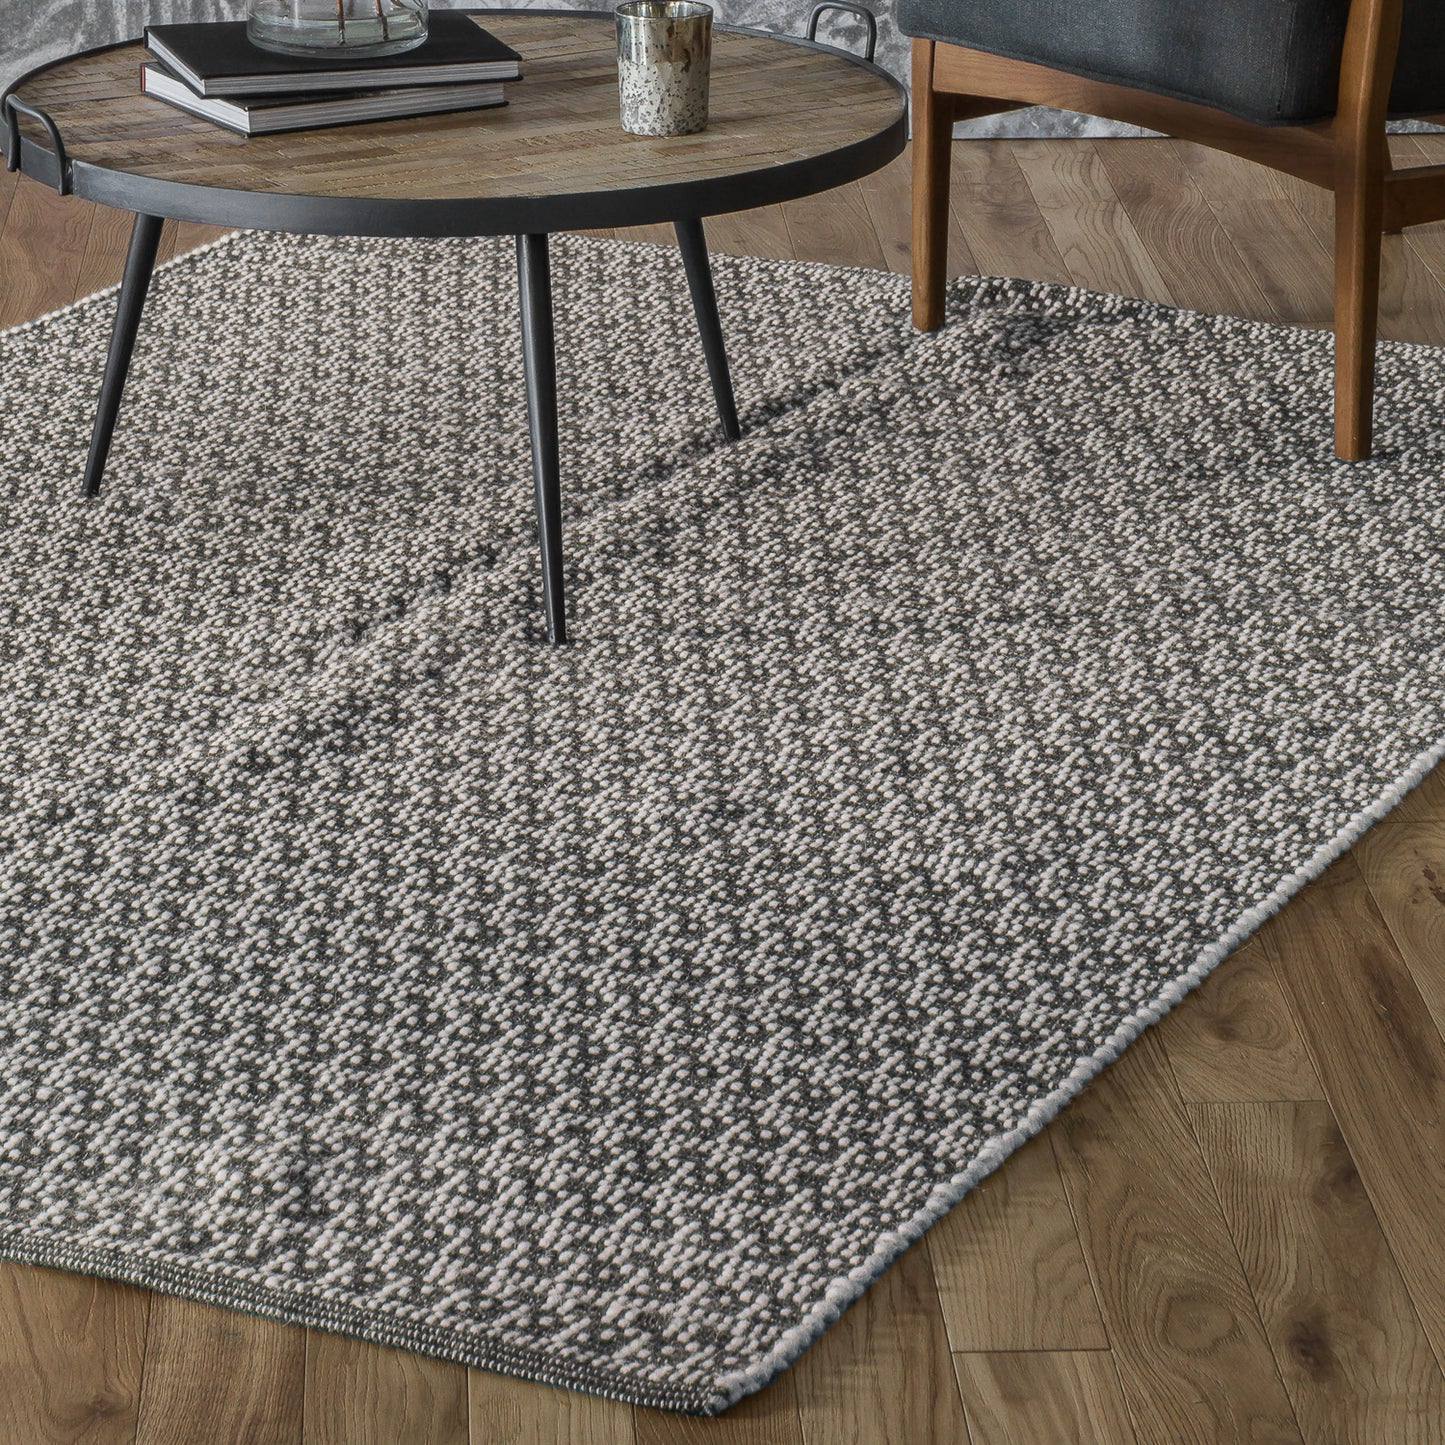 An Kellaton Rug Natural 1600x2300mm from Kikiathome.co.uk adds to the interior decor of a home with a wooden floor.